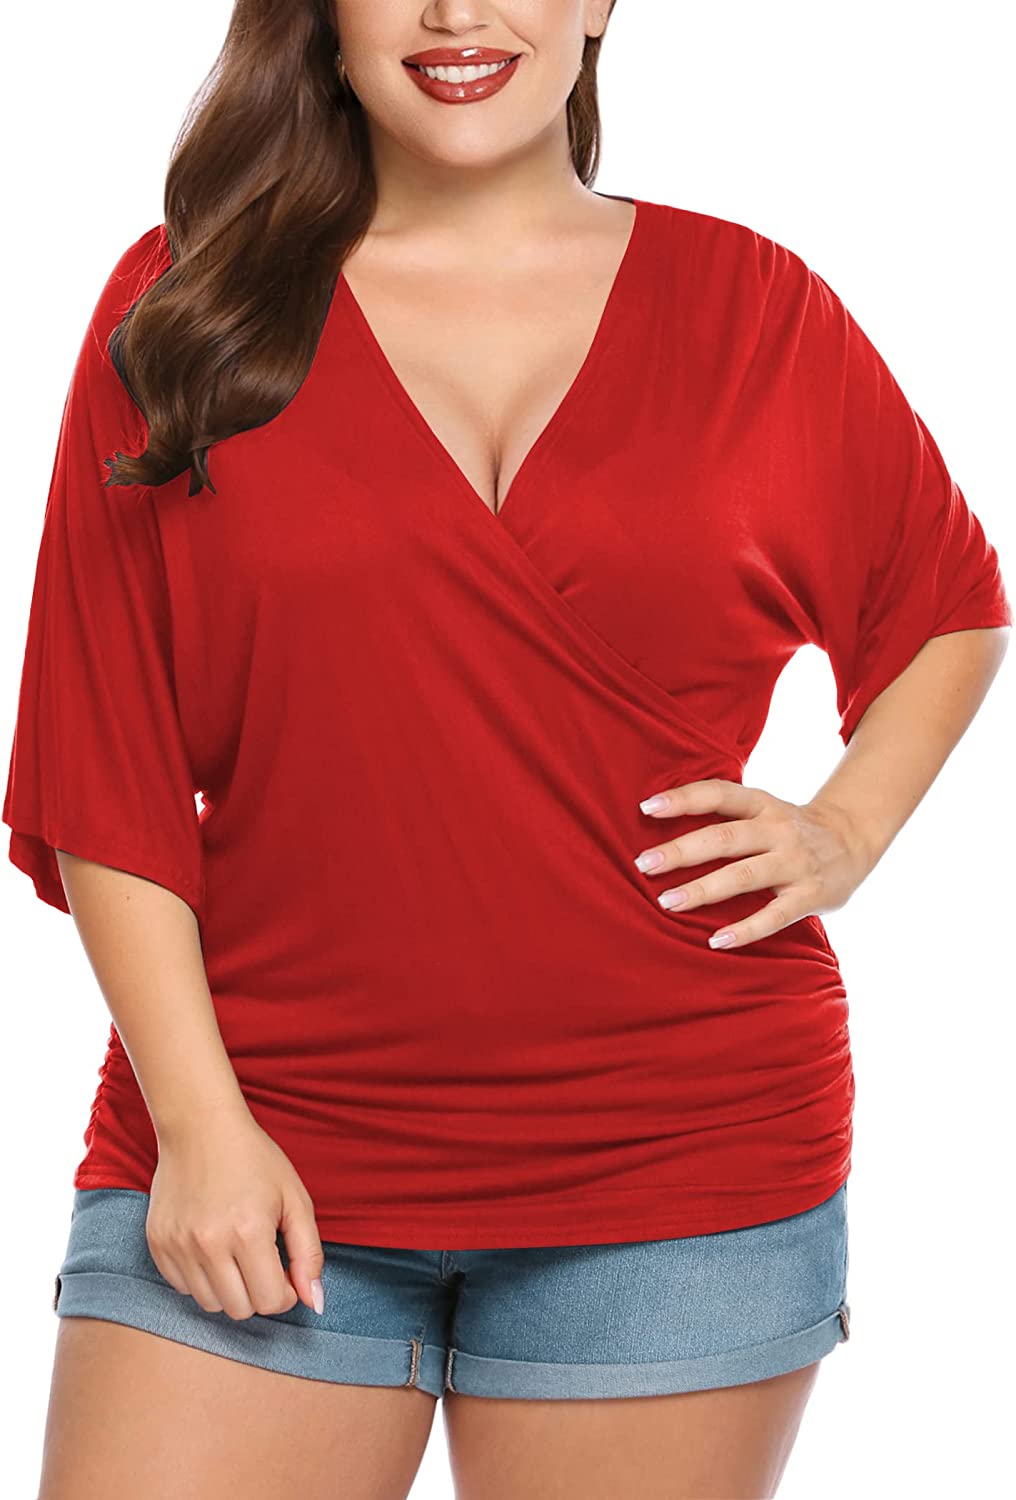 IN'VOLAND Plus Size V Neck Long Sleeve Tops Womens Sexy Wrap